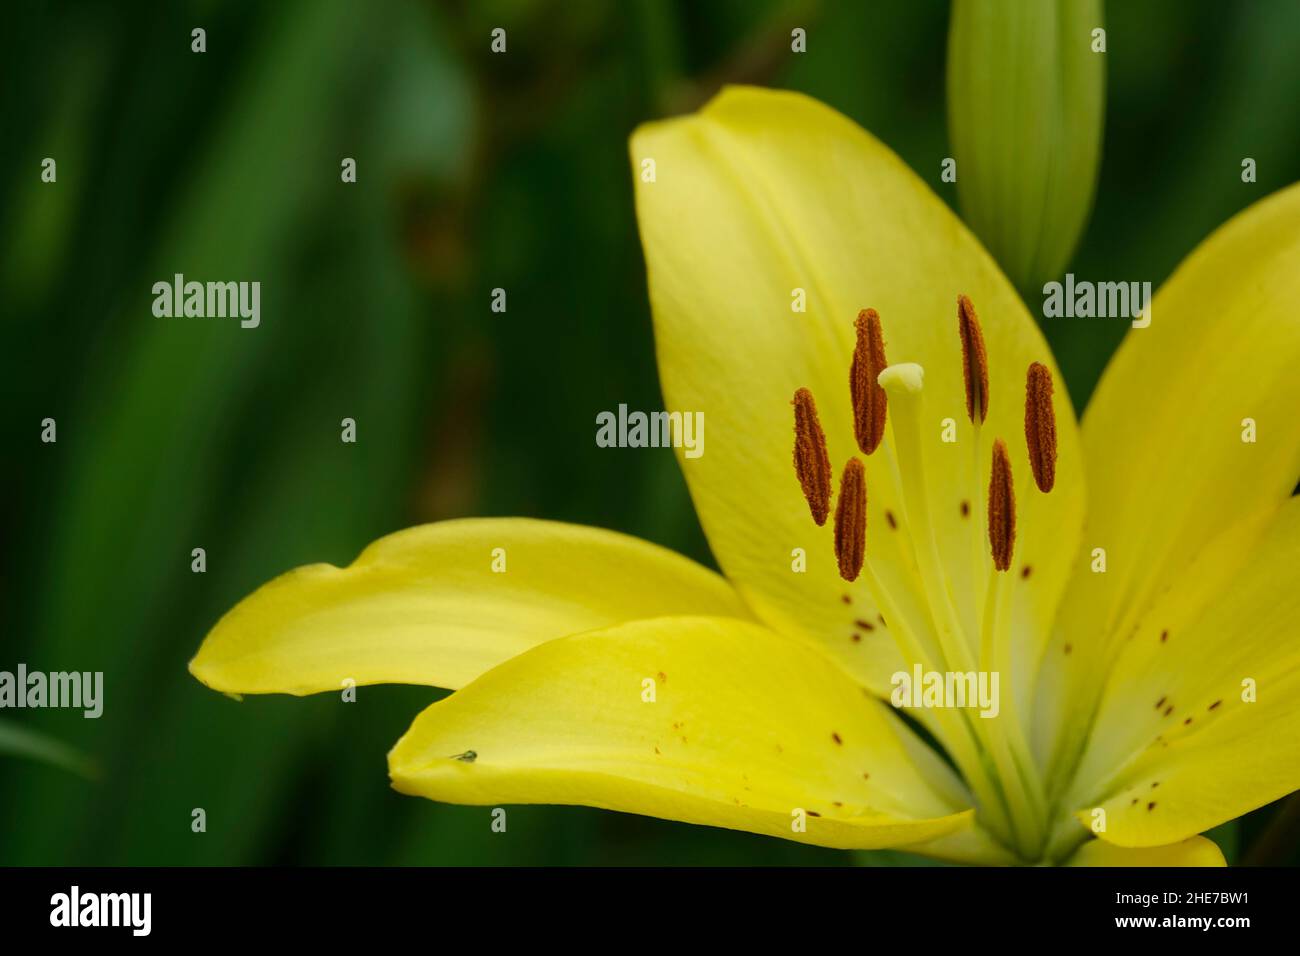 One Yellow Lily Lilium Bulbiferum, Flawless, Micro Photography, Garden Plant with Yellow Petals, also called Freya, American Hero, Asiatic Fire Lilies Stock Photo